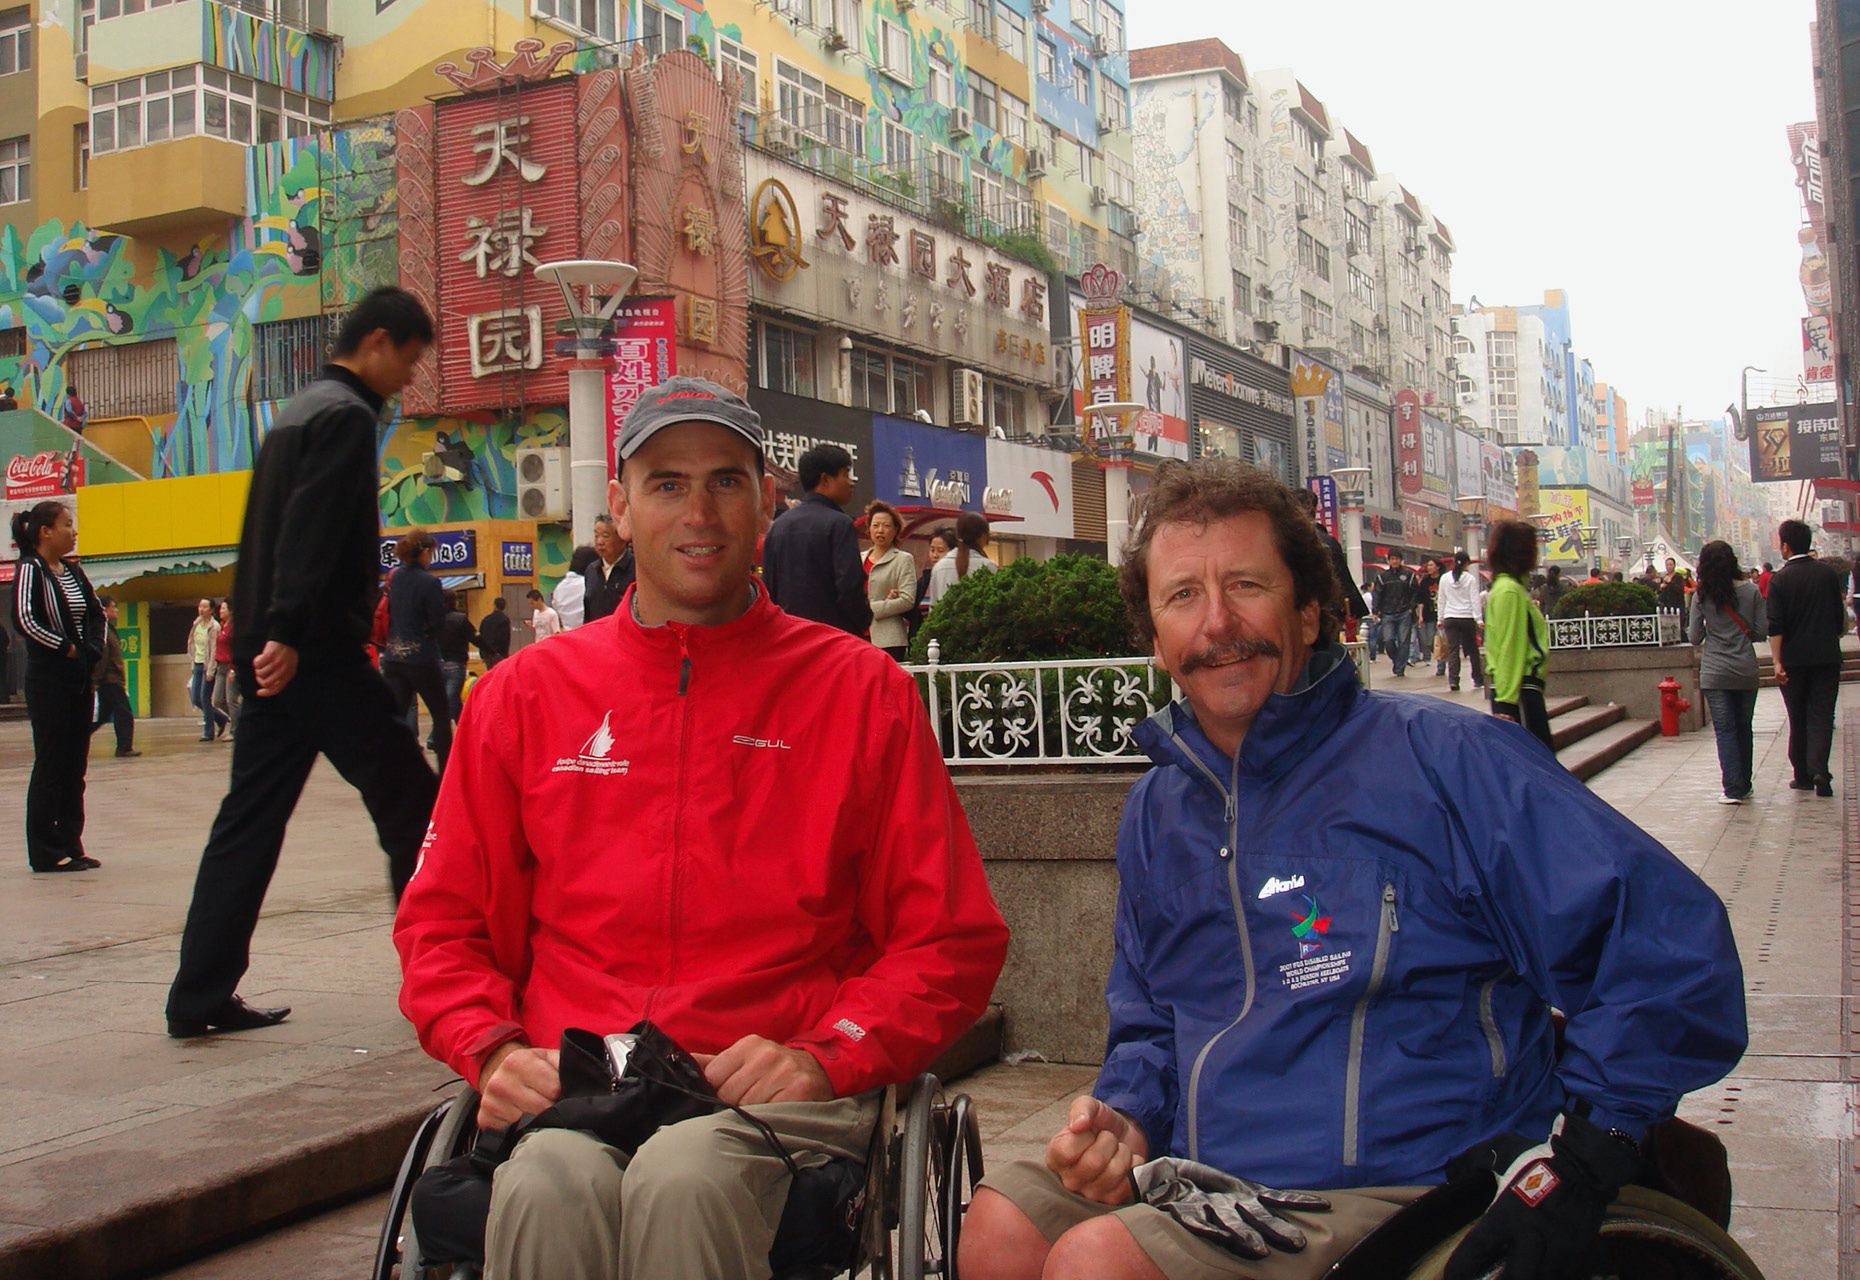 Paul Tingley and Danny McCoy in wheelchairs on a sidewalk in China with buildings in background